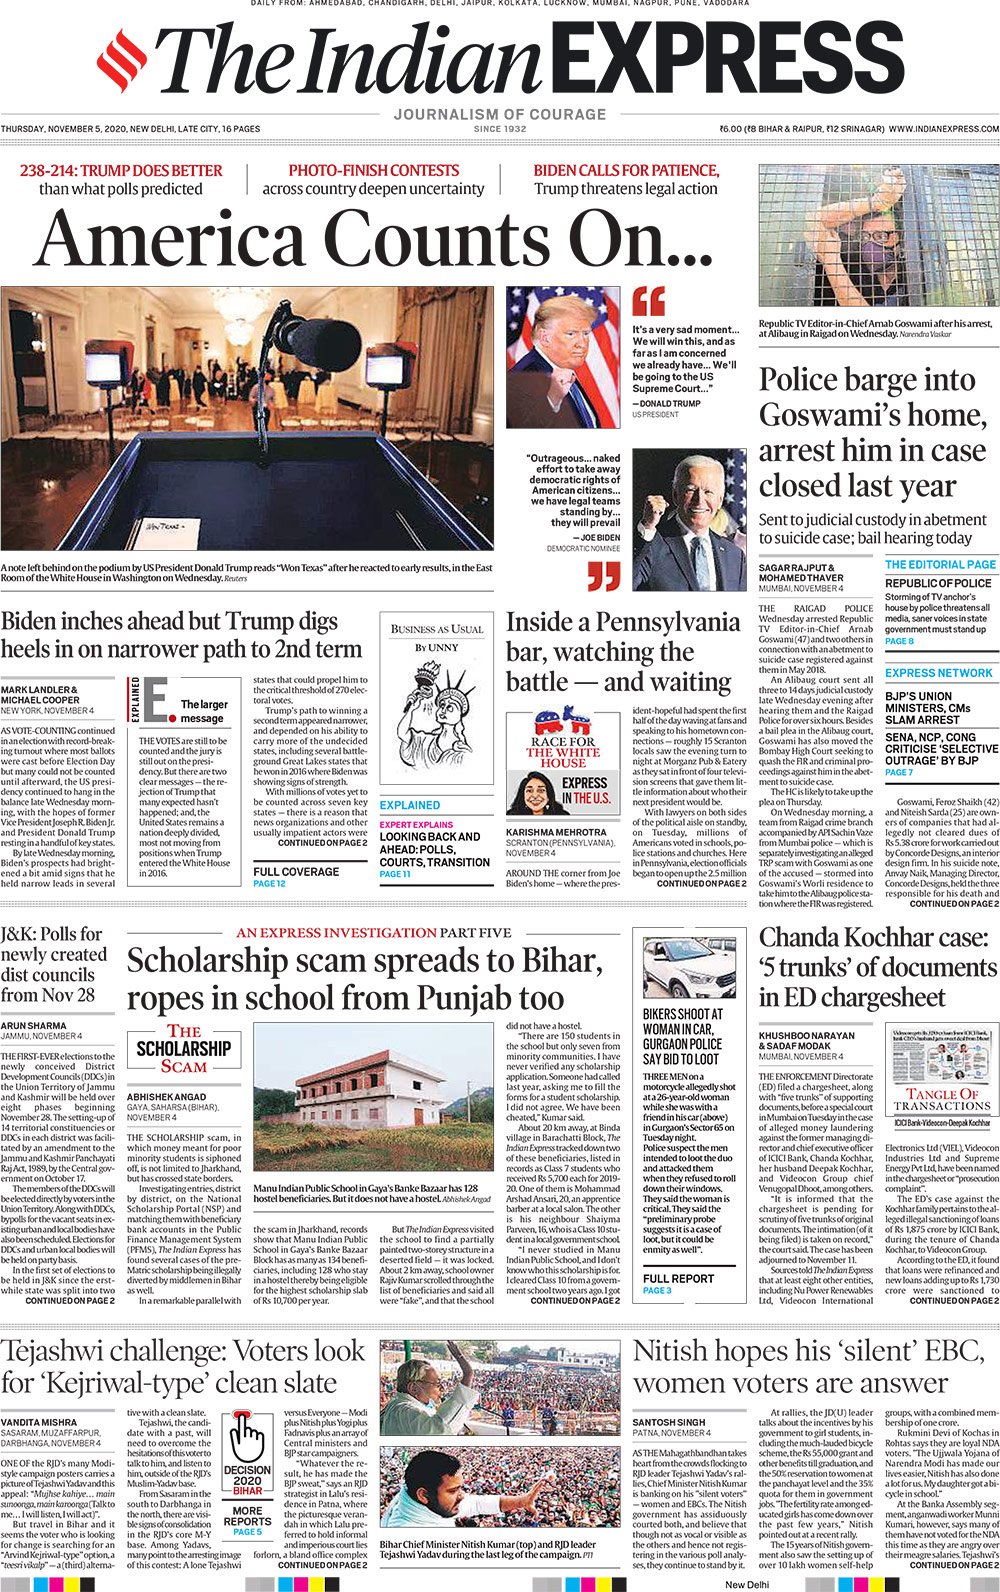 Newspaper Headlines Tight Race In Key Us States To Decide Next President And Other Top Stories